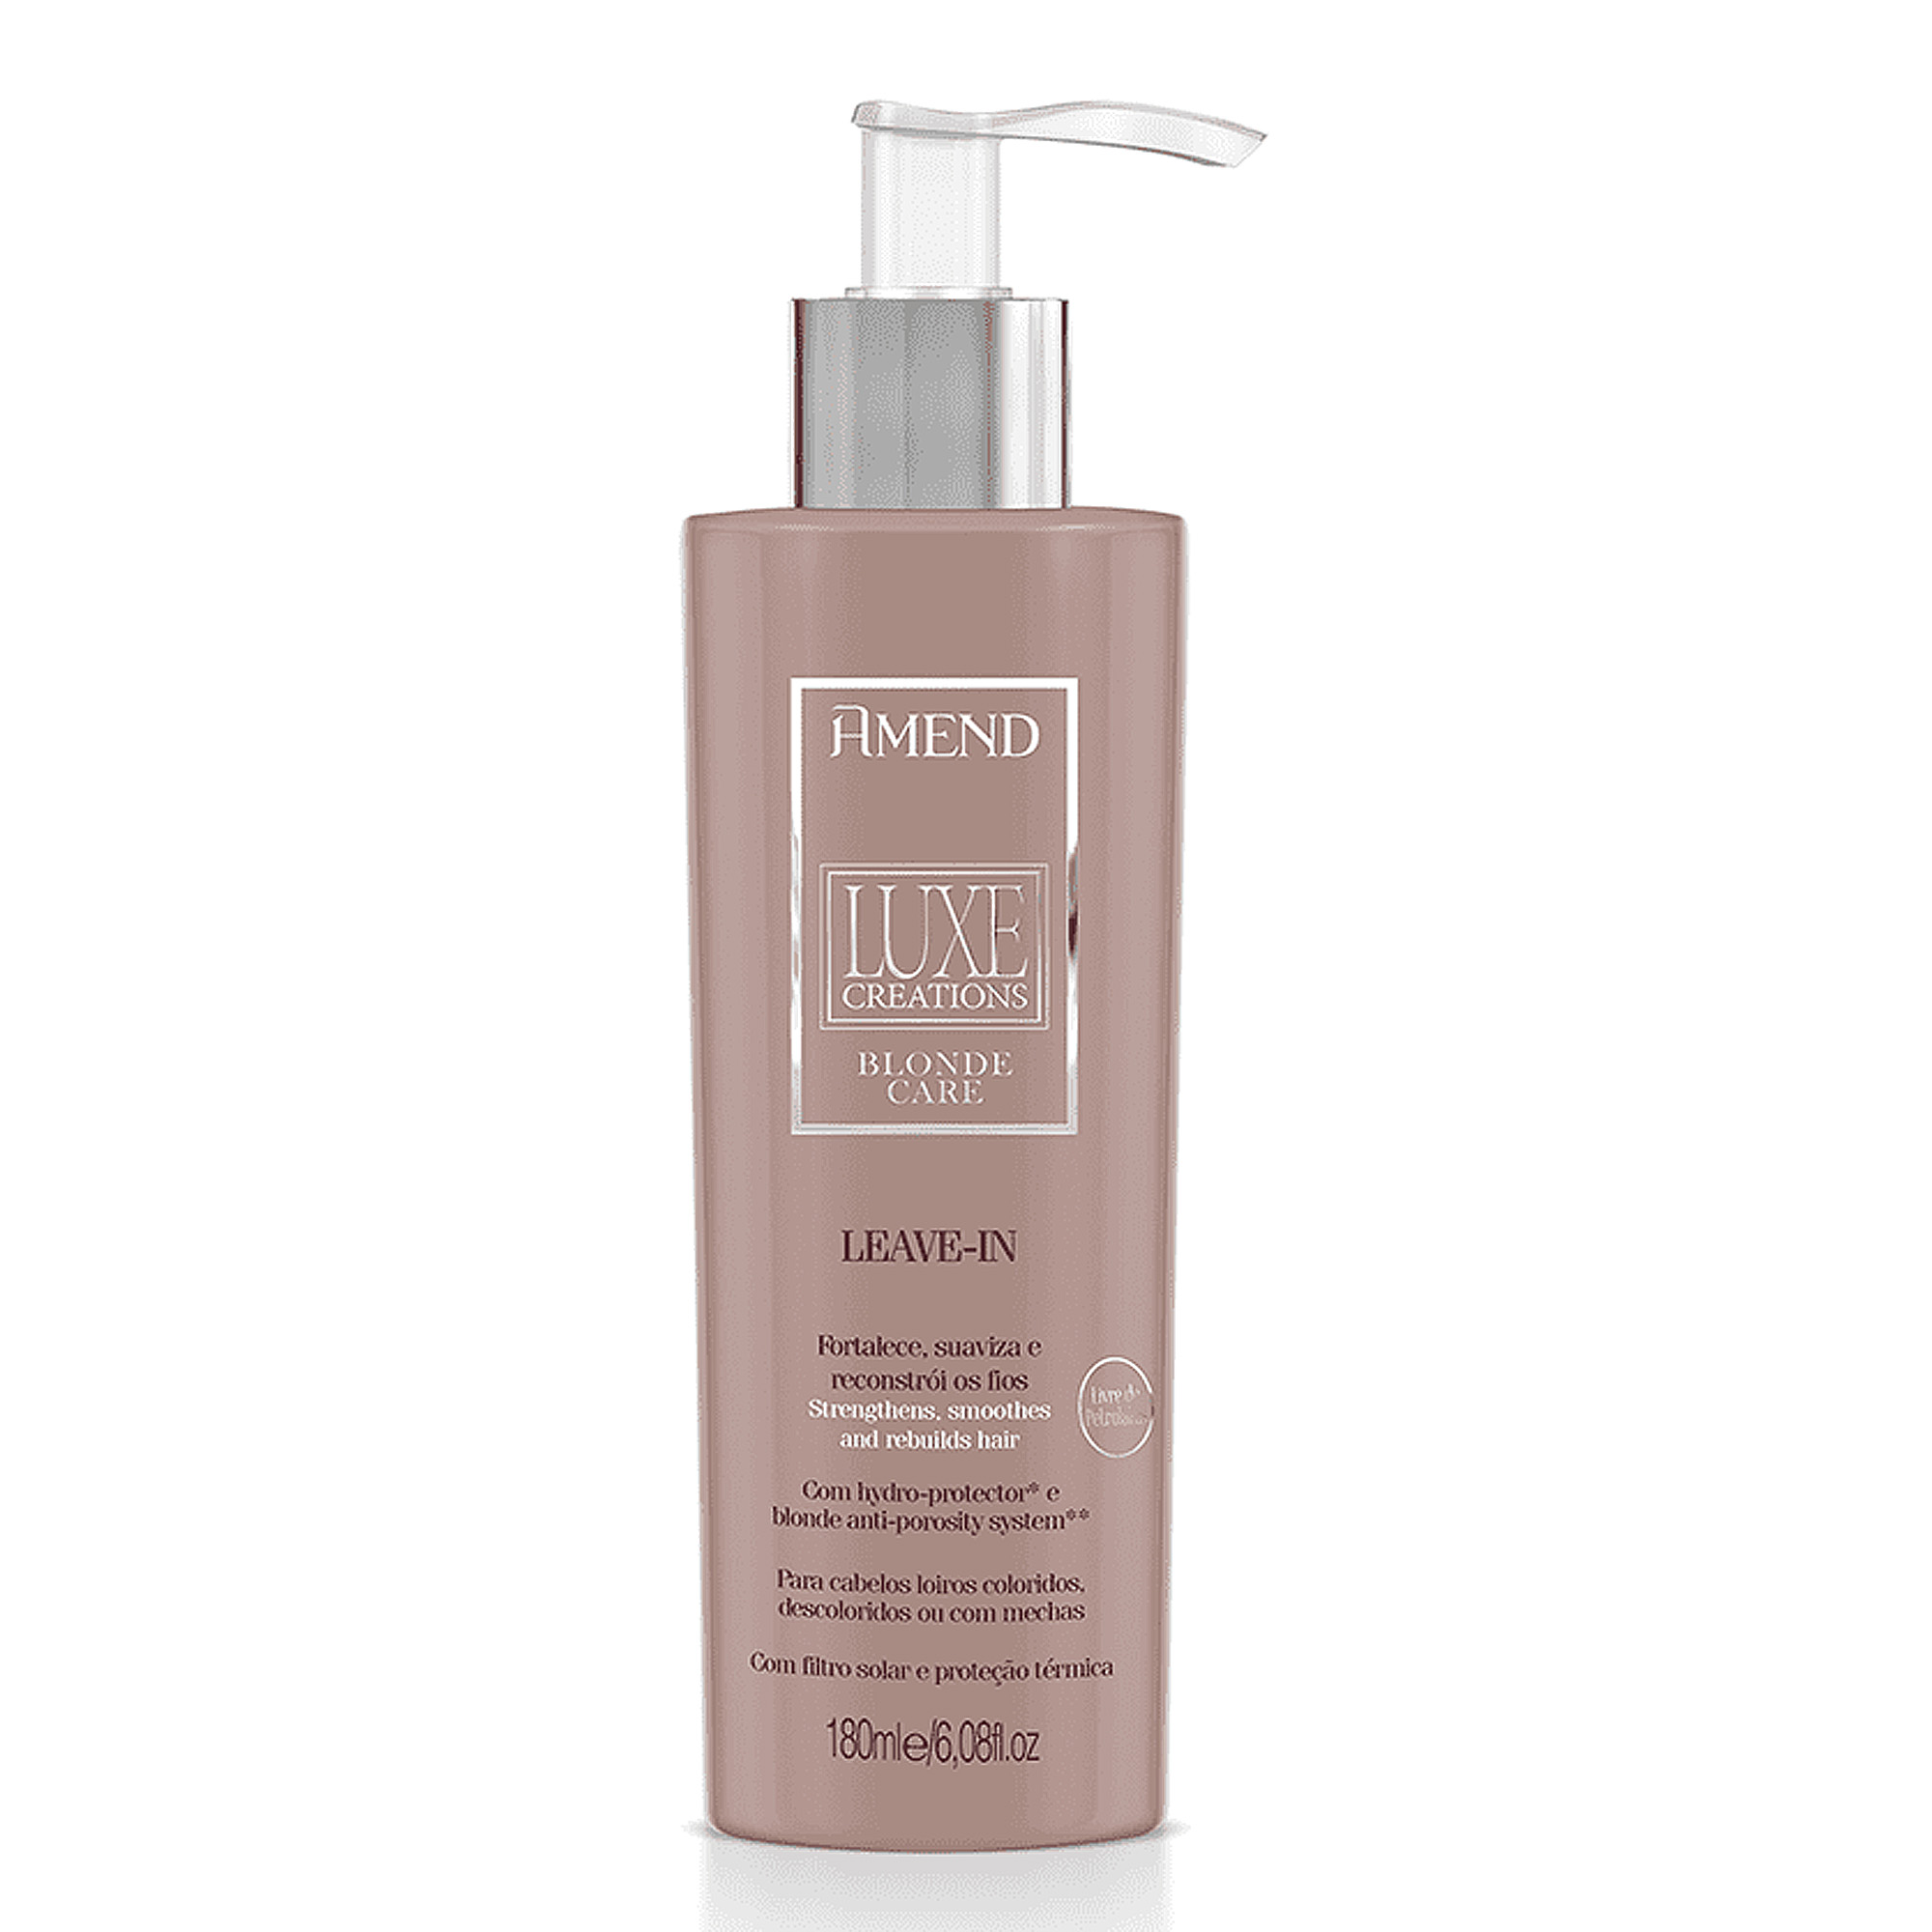 Leave-in Amend Luxe Creations Blonde Care 180ml - Foto 0